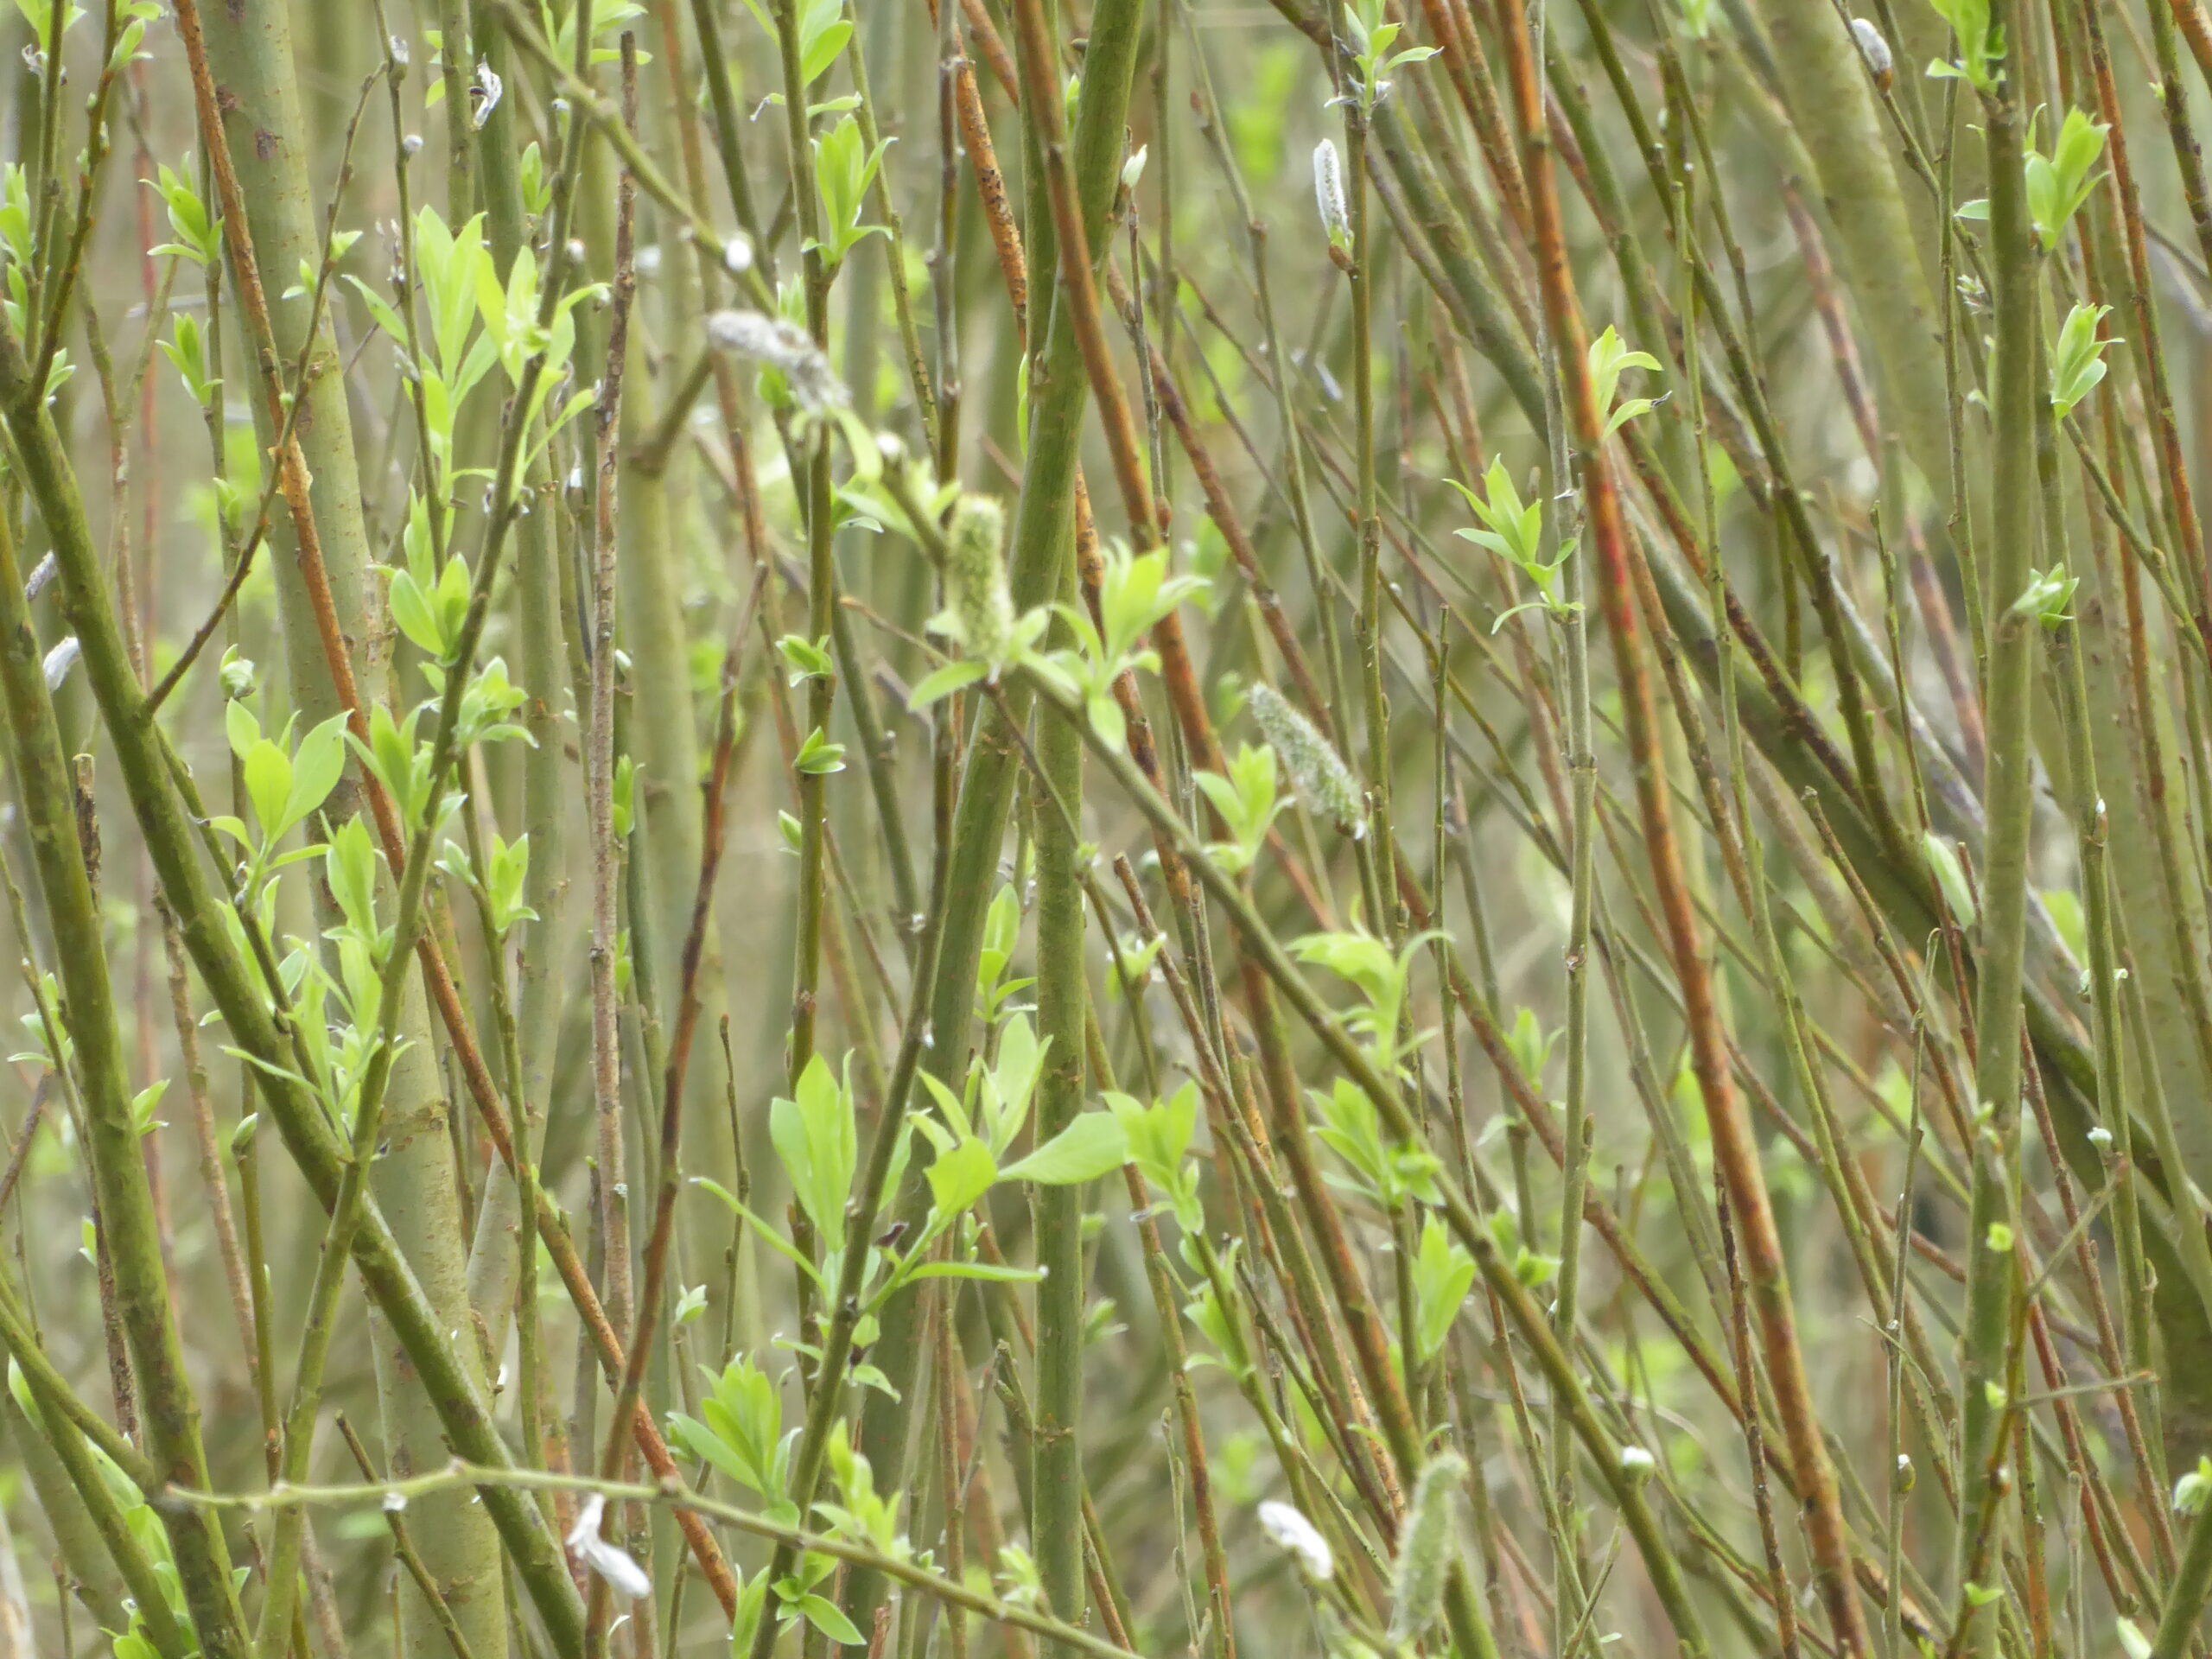 Grey Willow (Salix cinerea) or hybrid with Osier